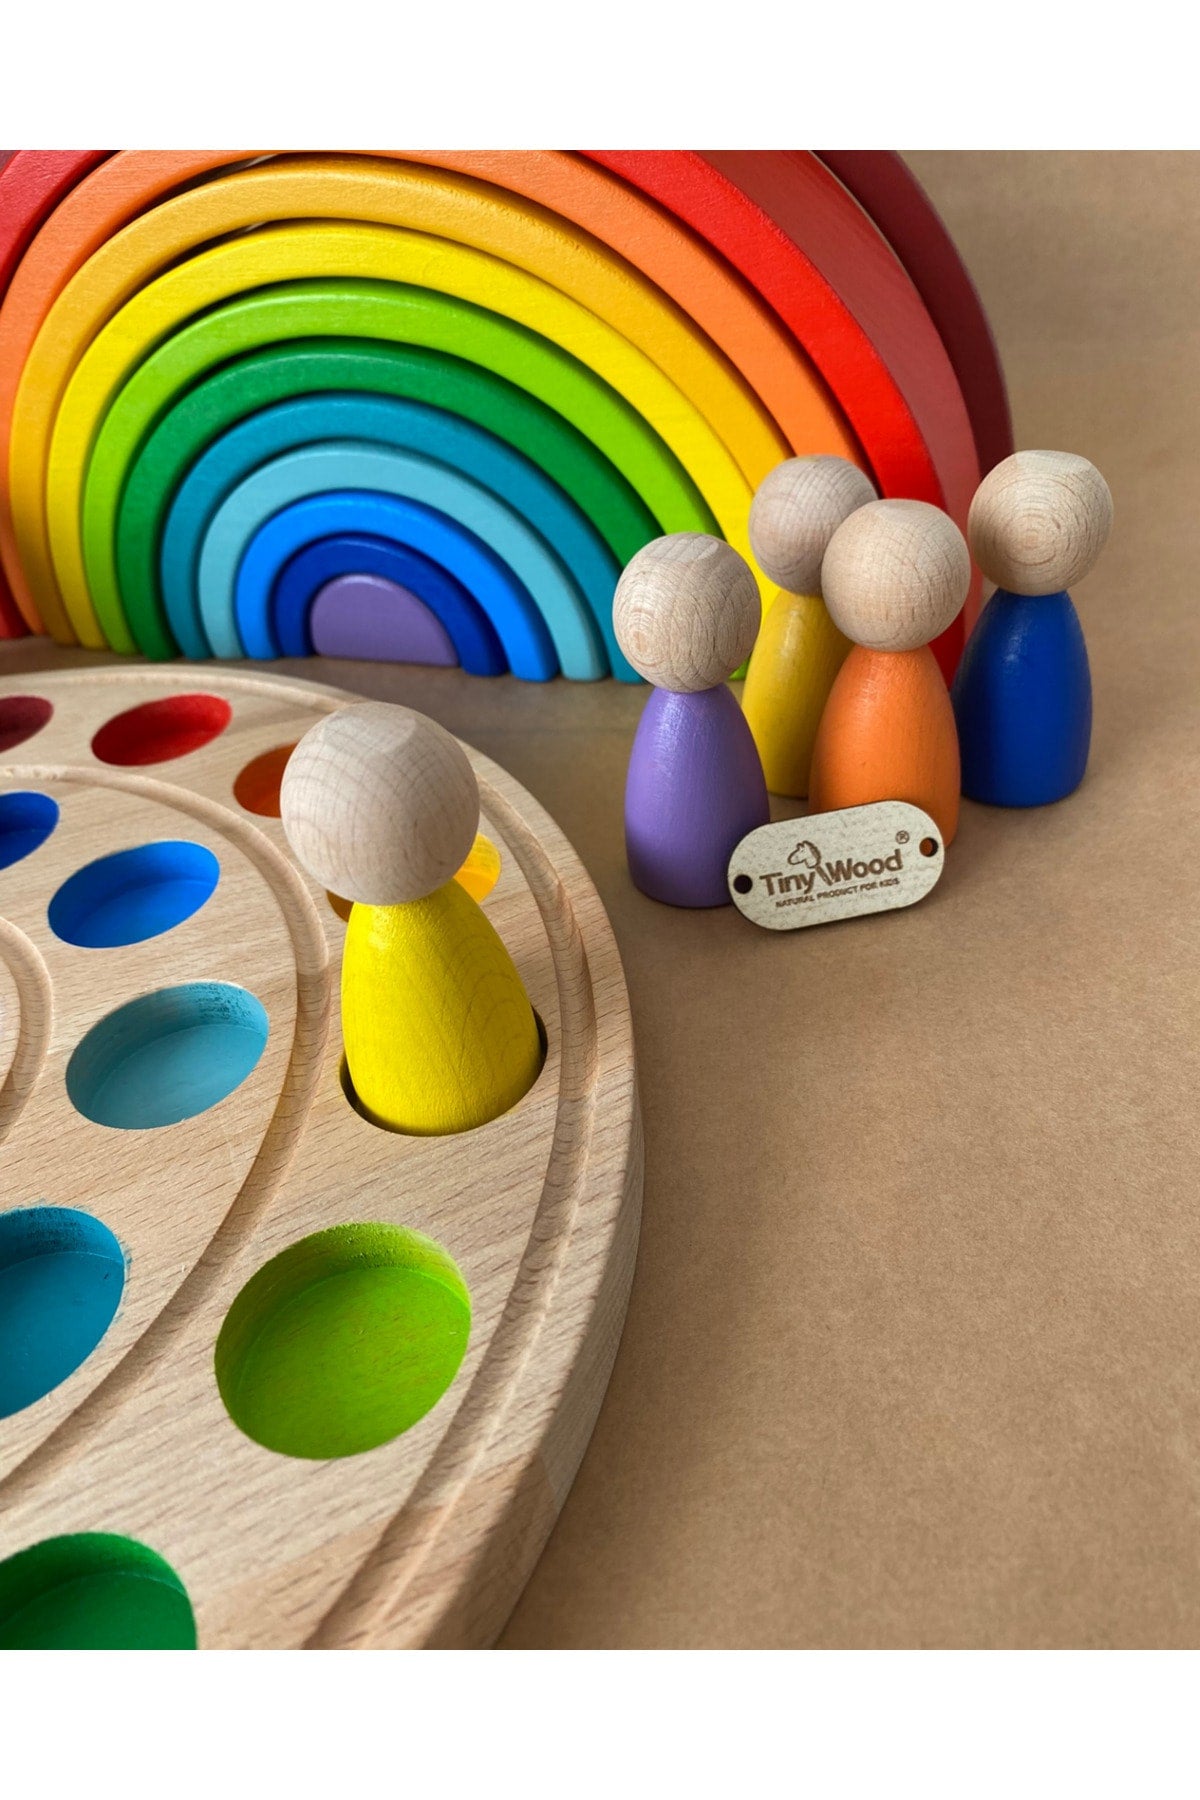 1 Year 12 Waldorf Rainbow Peg Baby Tray Set, Rainbow 12 Piece Color Matching Wooden Toy